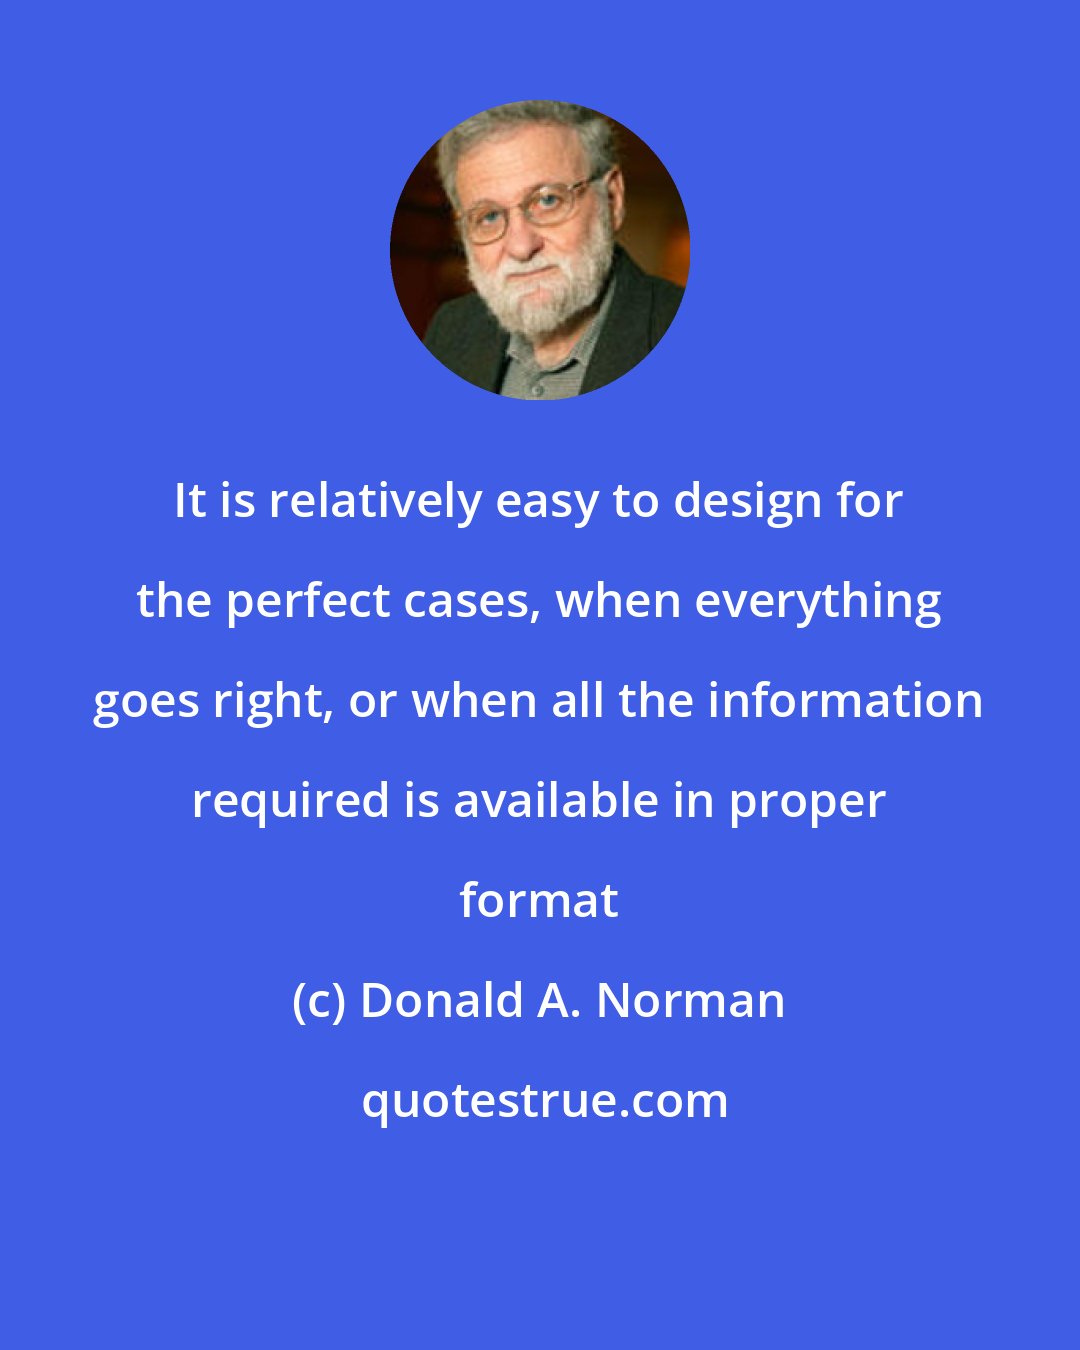 Donald A. Norman: It is relatively easy to design for the perfect cases, when everything goes right, or when all the information required is available in proper format